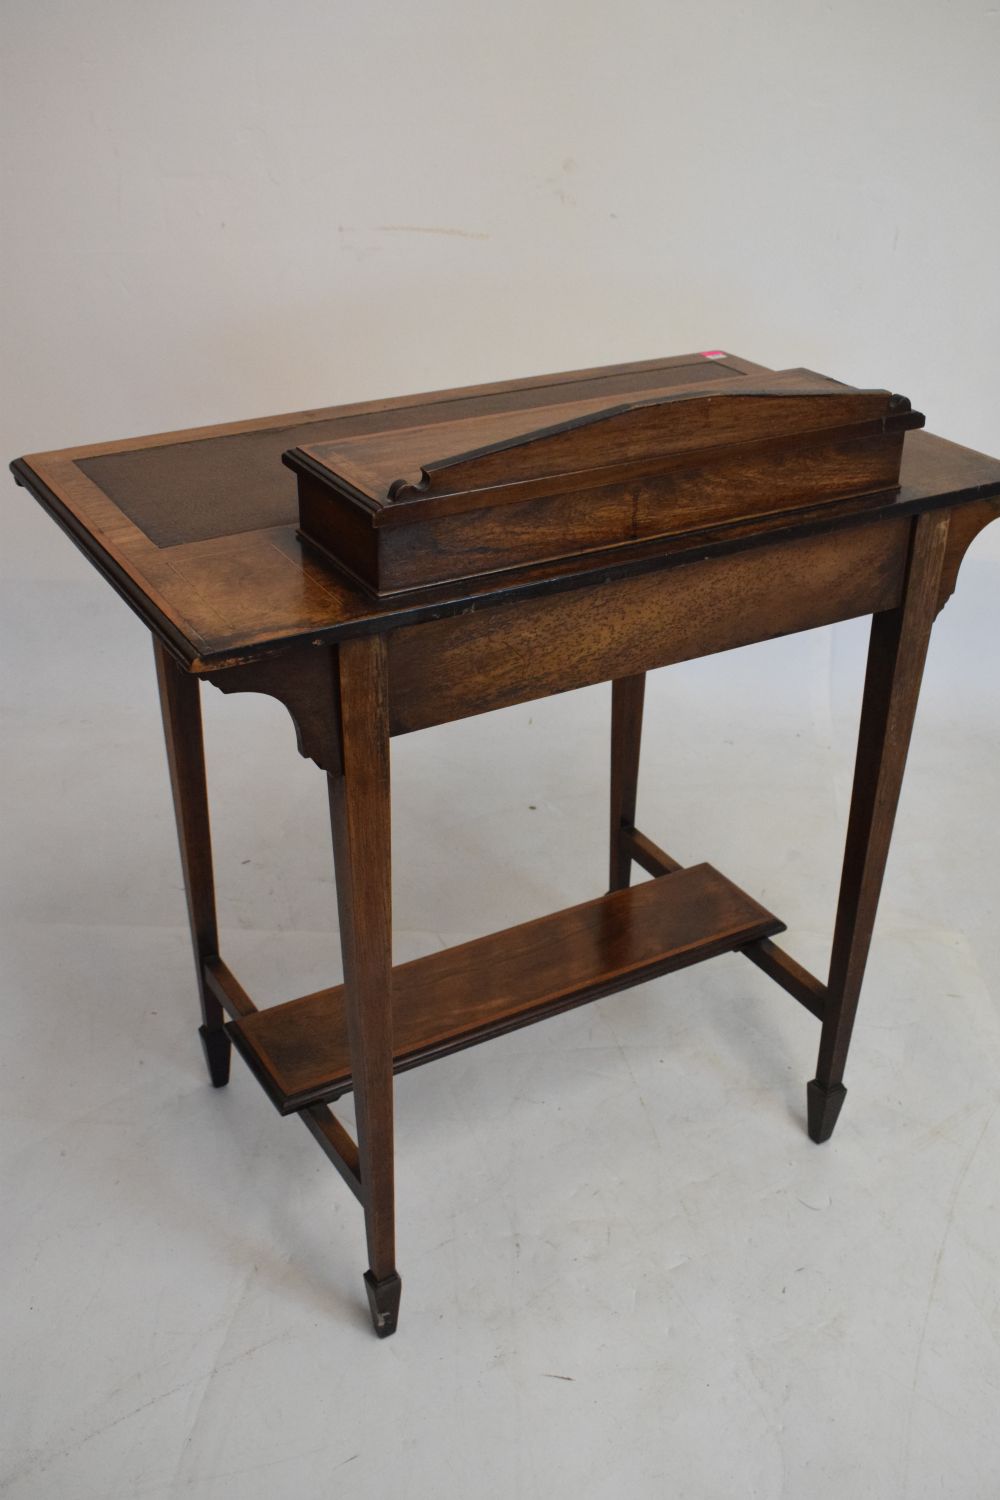 Edwardian inlaid rosewood writing table, with hinged superstructure enclosing stationery divisions - Image 6 of 6